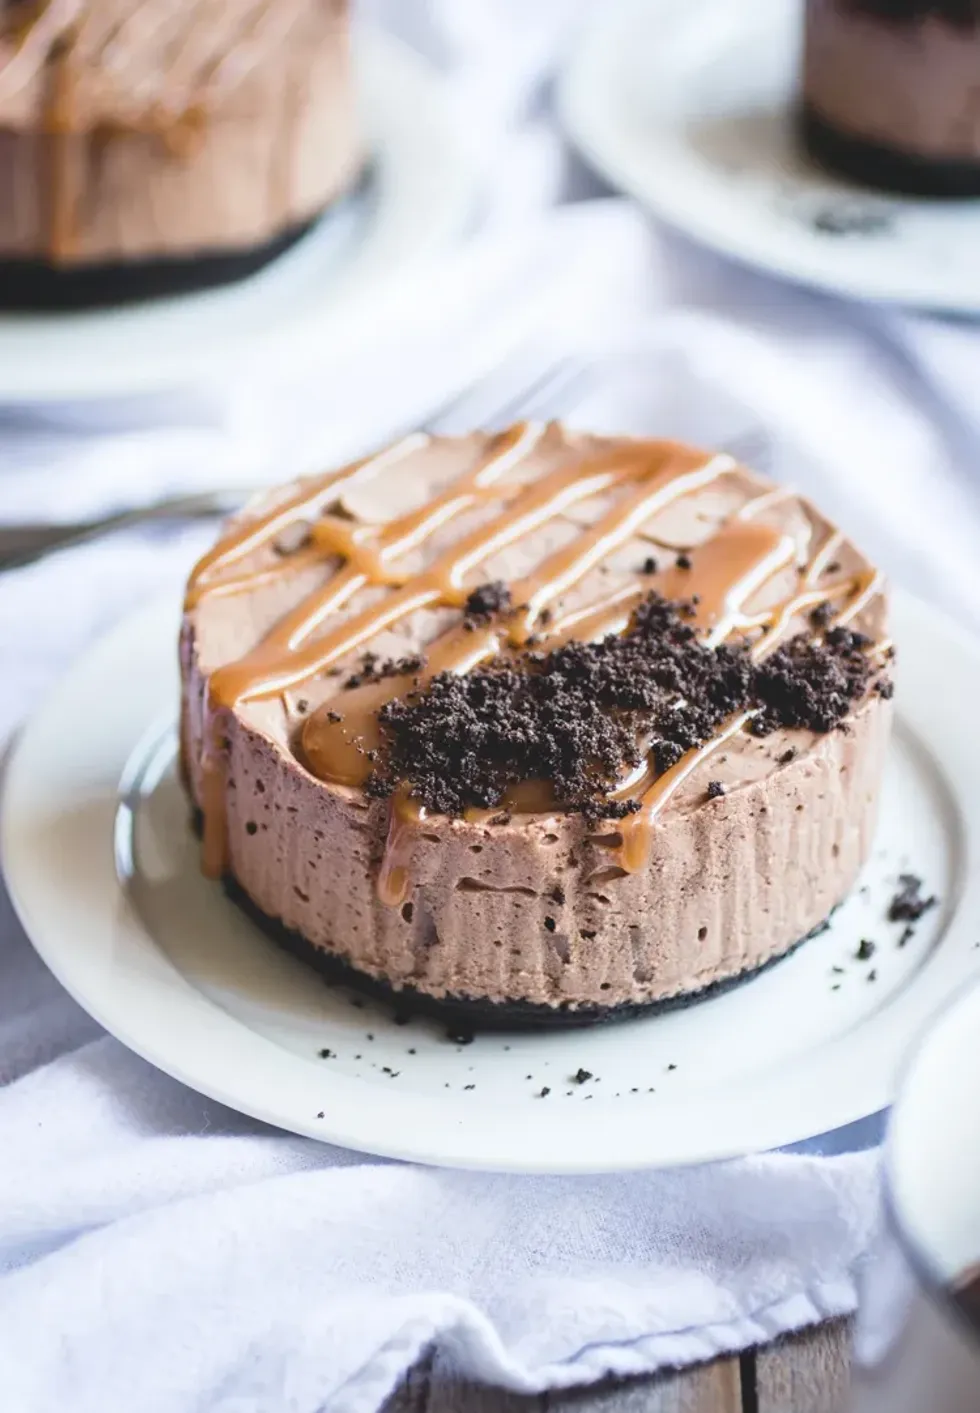 Leftover Halloween Candy No-Bake Chocolate Cheesecakes